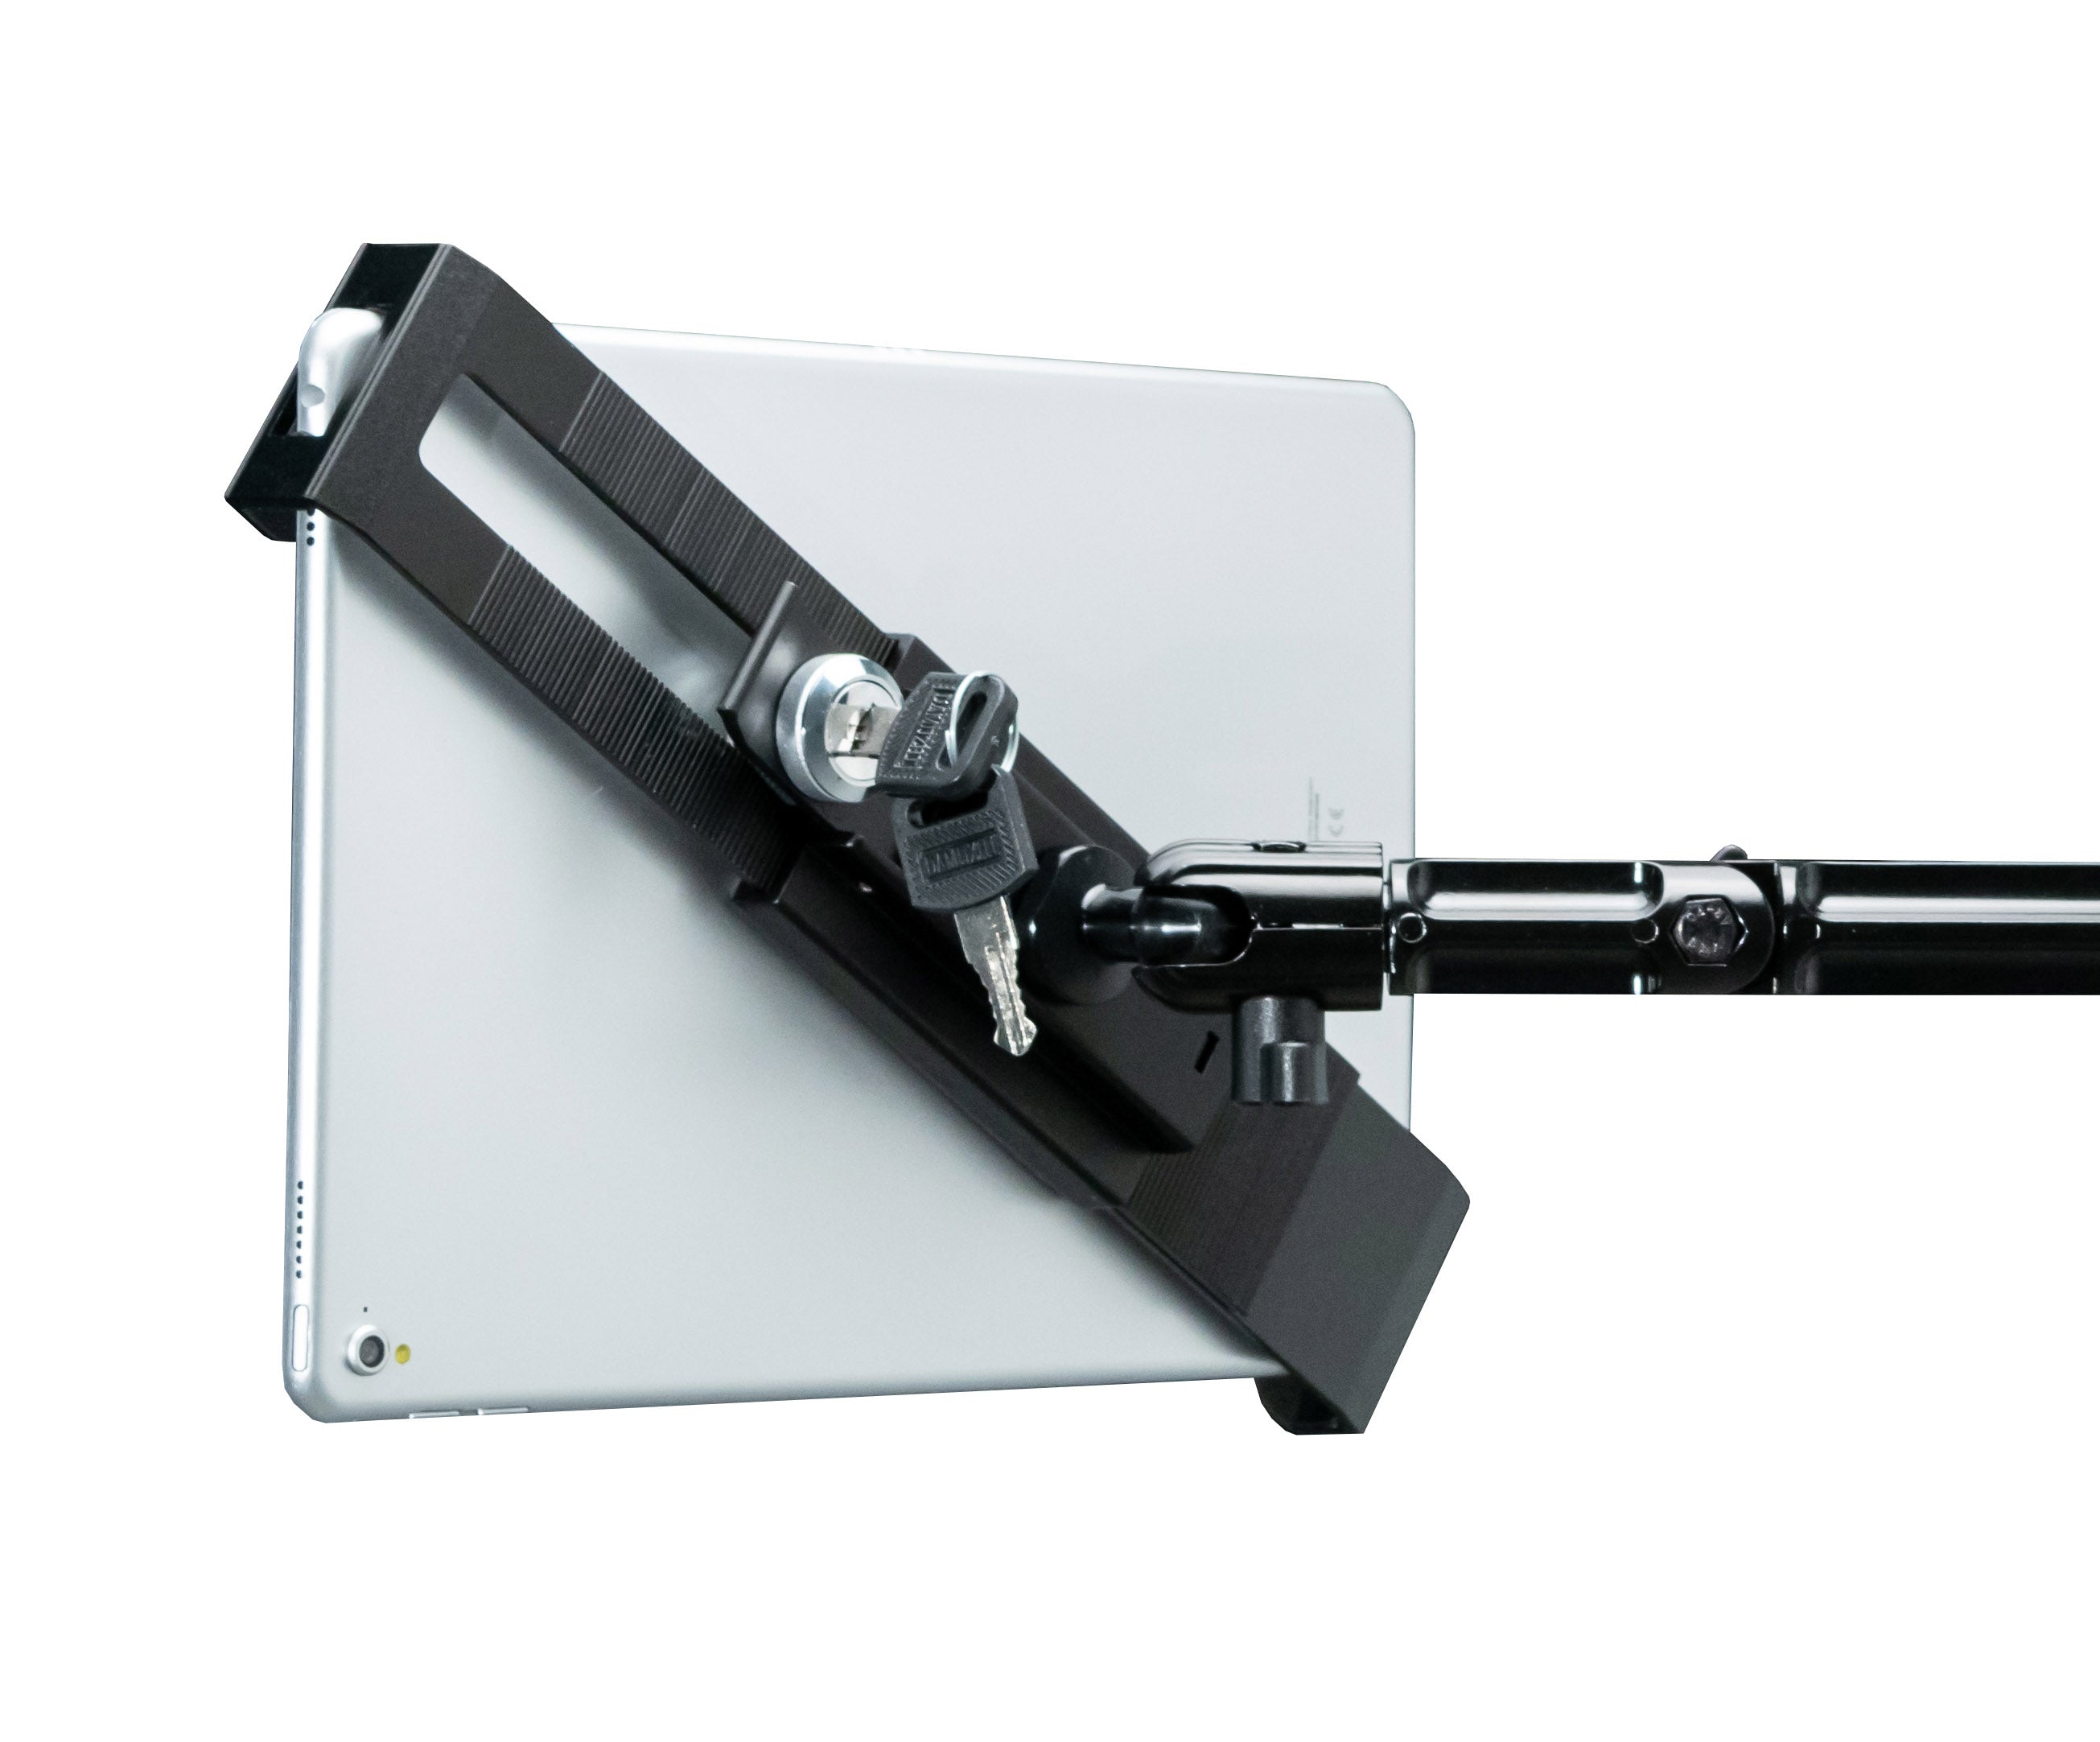 Custom Flex Security Suction Mount for 7-14 Inch Tablets, including iPad 10.2-inch (7th/ 8th/ 9th Generation)